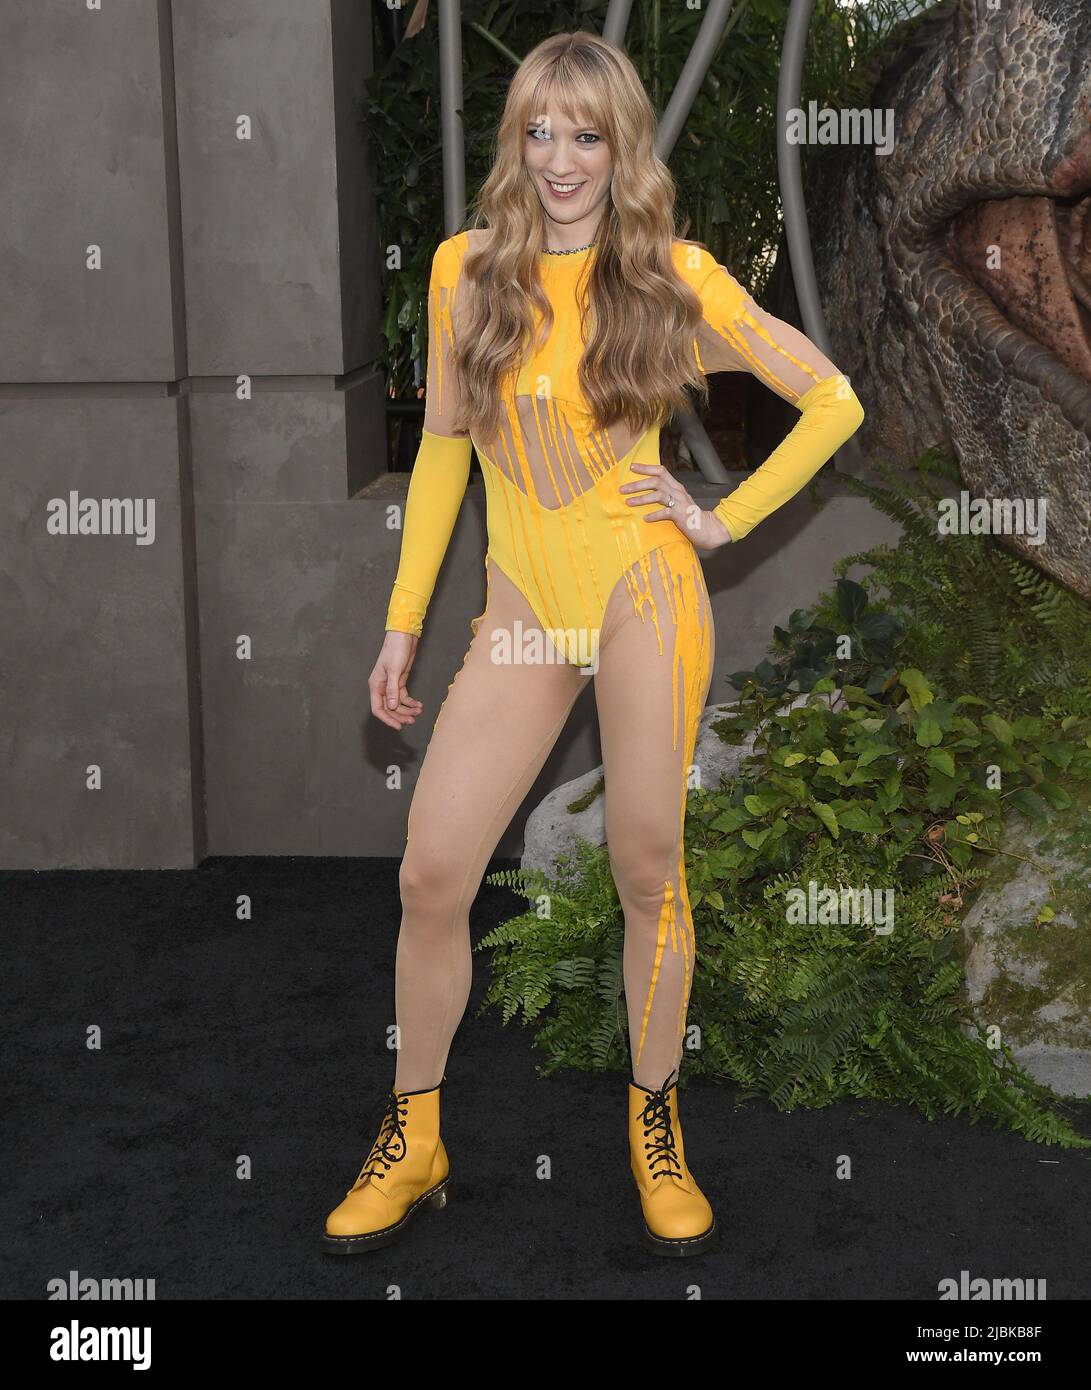 Los Angeles, USA. 06th June, 2022. Emily Carmichael arrives at the Universal Pictures' JURASSIC WORLD DOMINION Premiere held at the TCL Chinese Theater on Monday, ?June 6, 2022. (Photo By Sthanlee B. Mirador/Sipa USA) Credit: Sipa USA/Alamy Live News Stock Photo